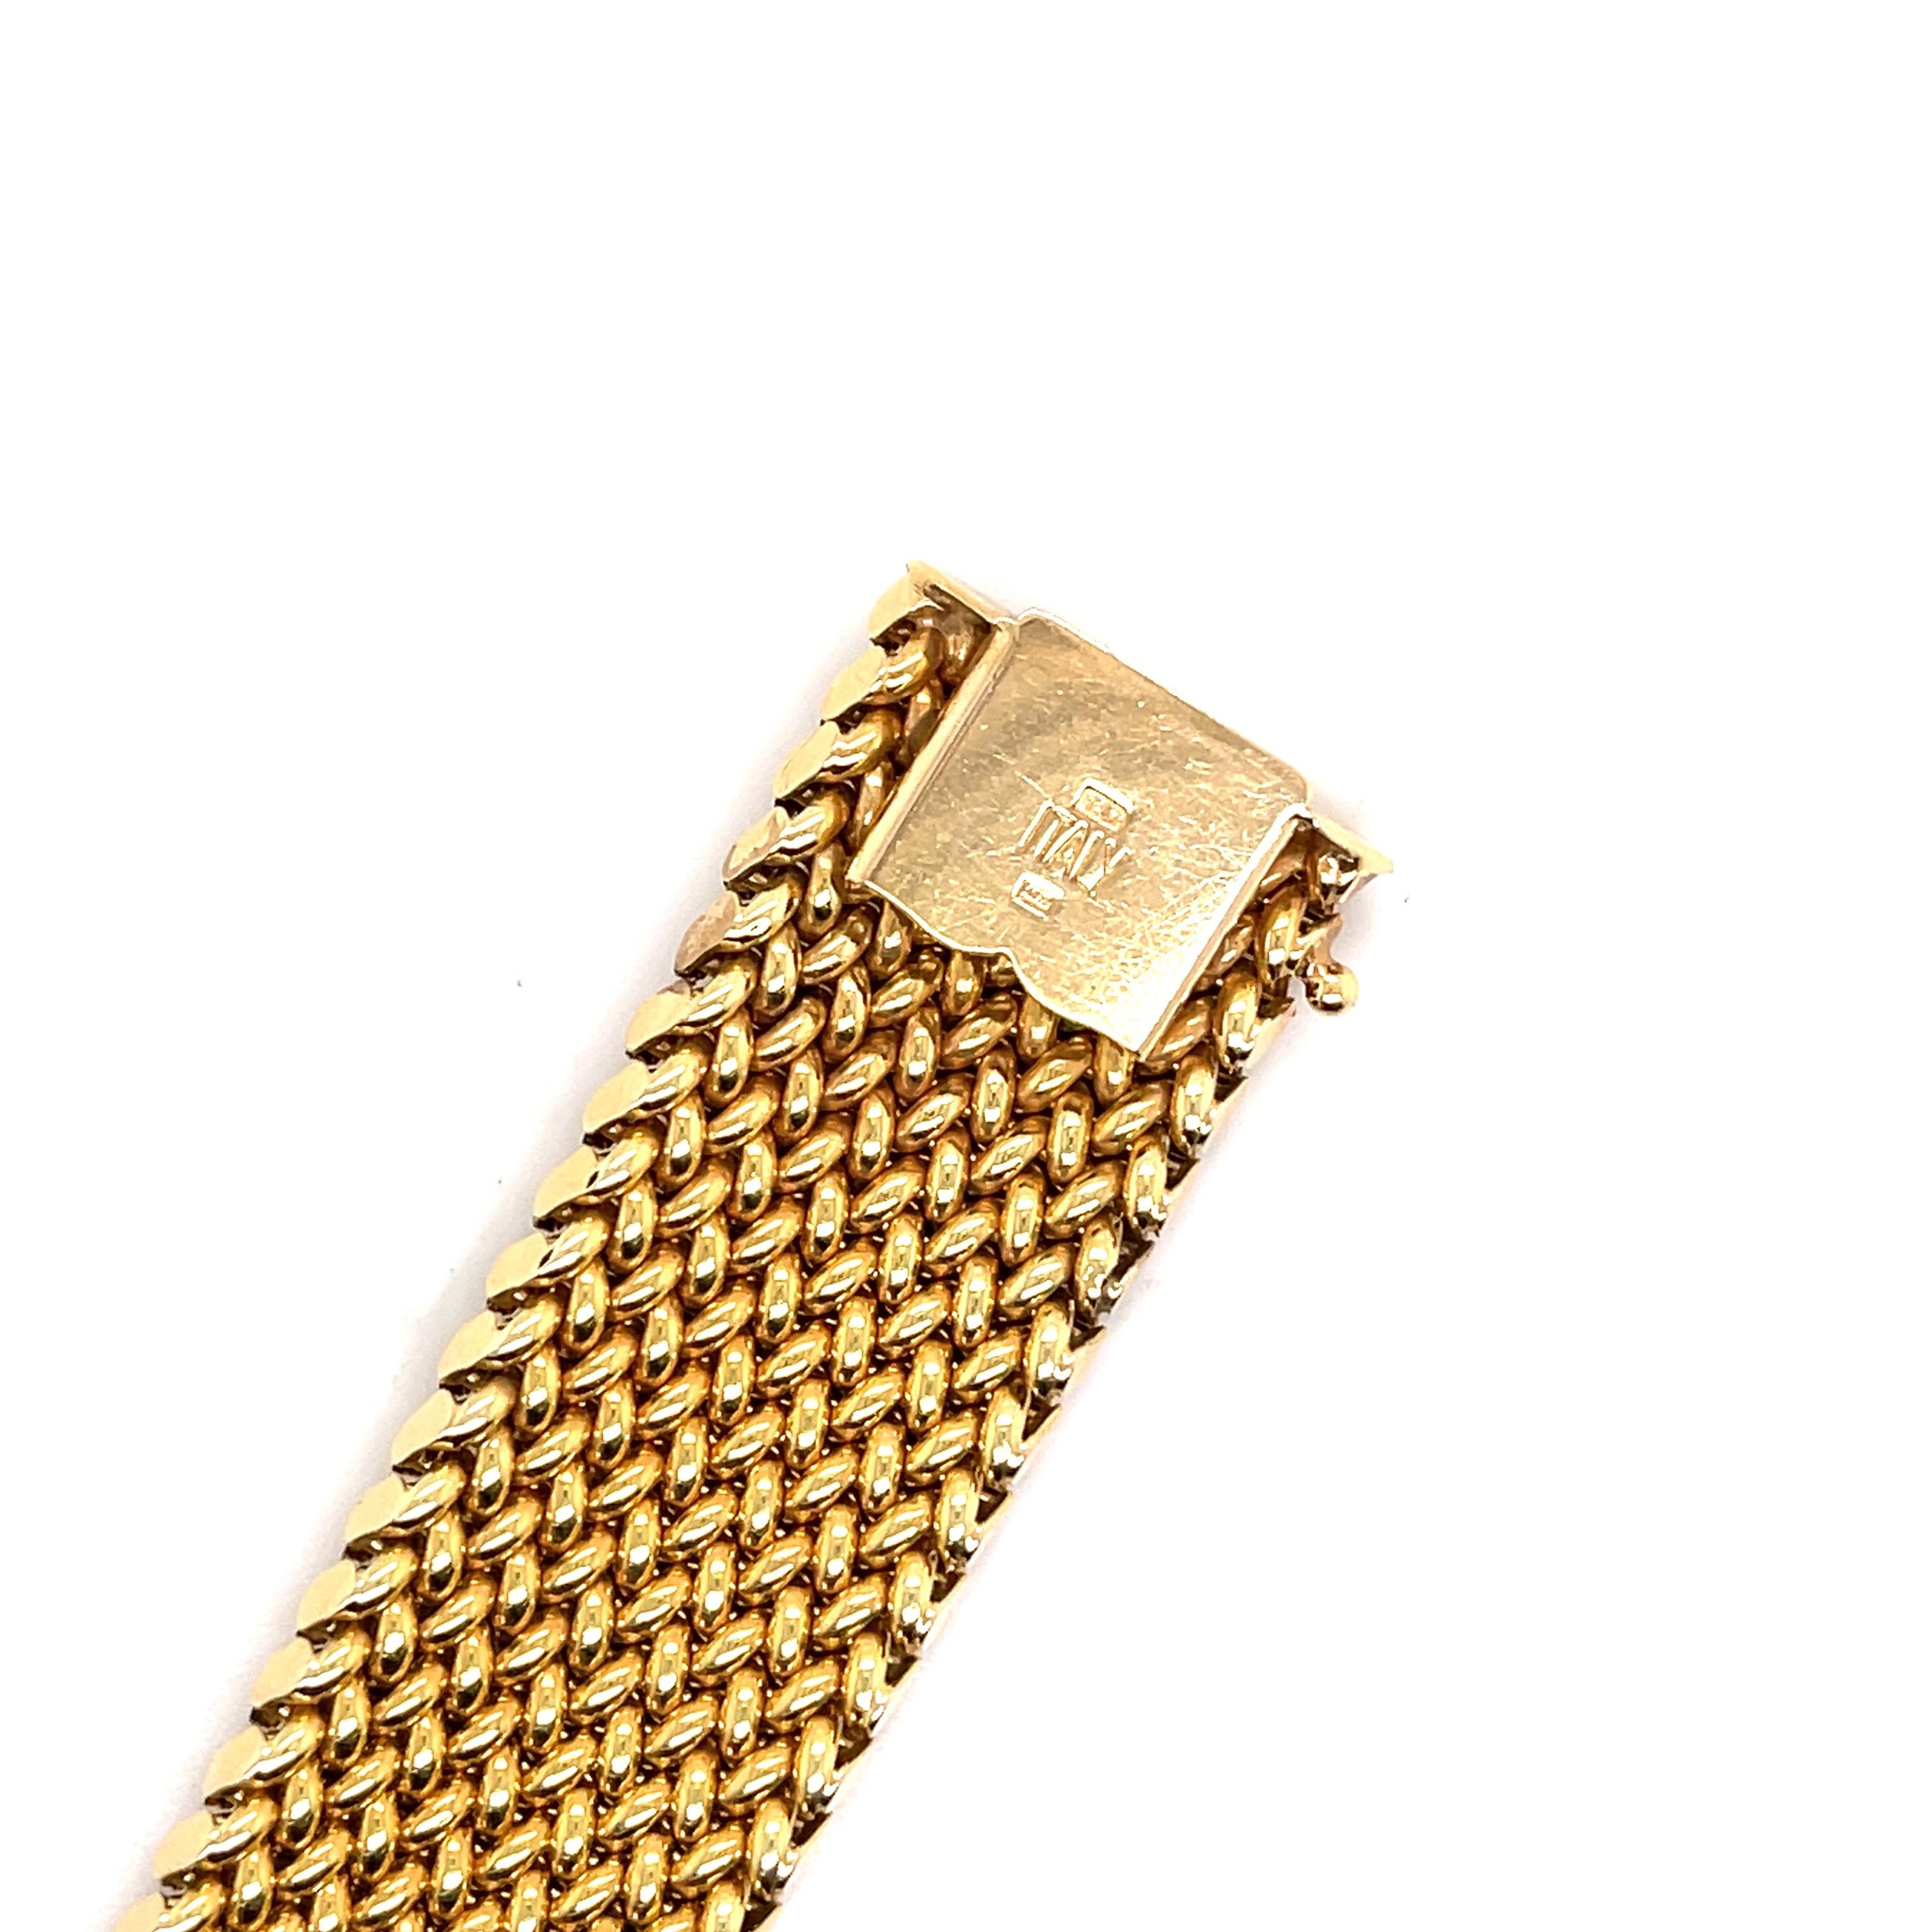 Wide Mesh Textured Bracelet 38.7 Grams 14 Karat Yellow Gold In Good Condition For Sale In New York, NY